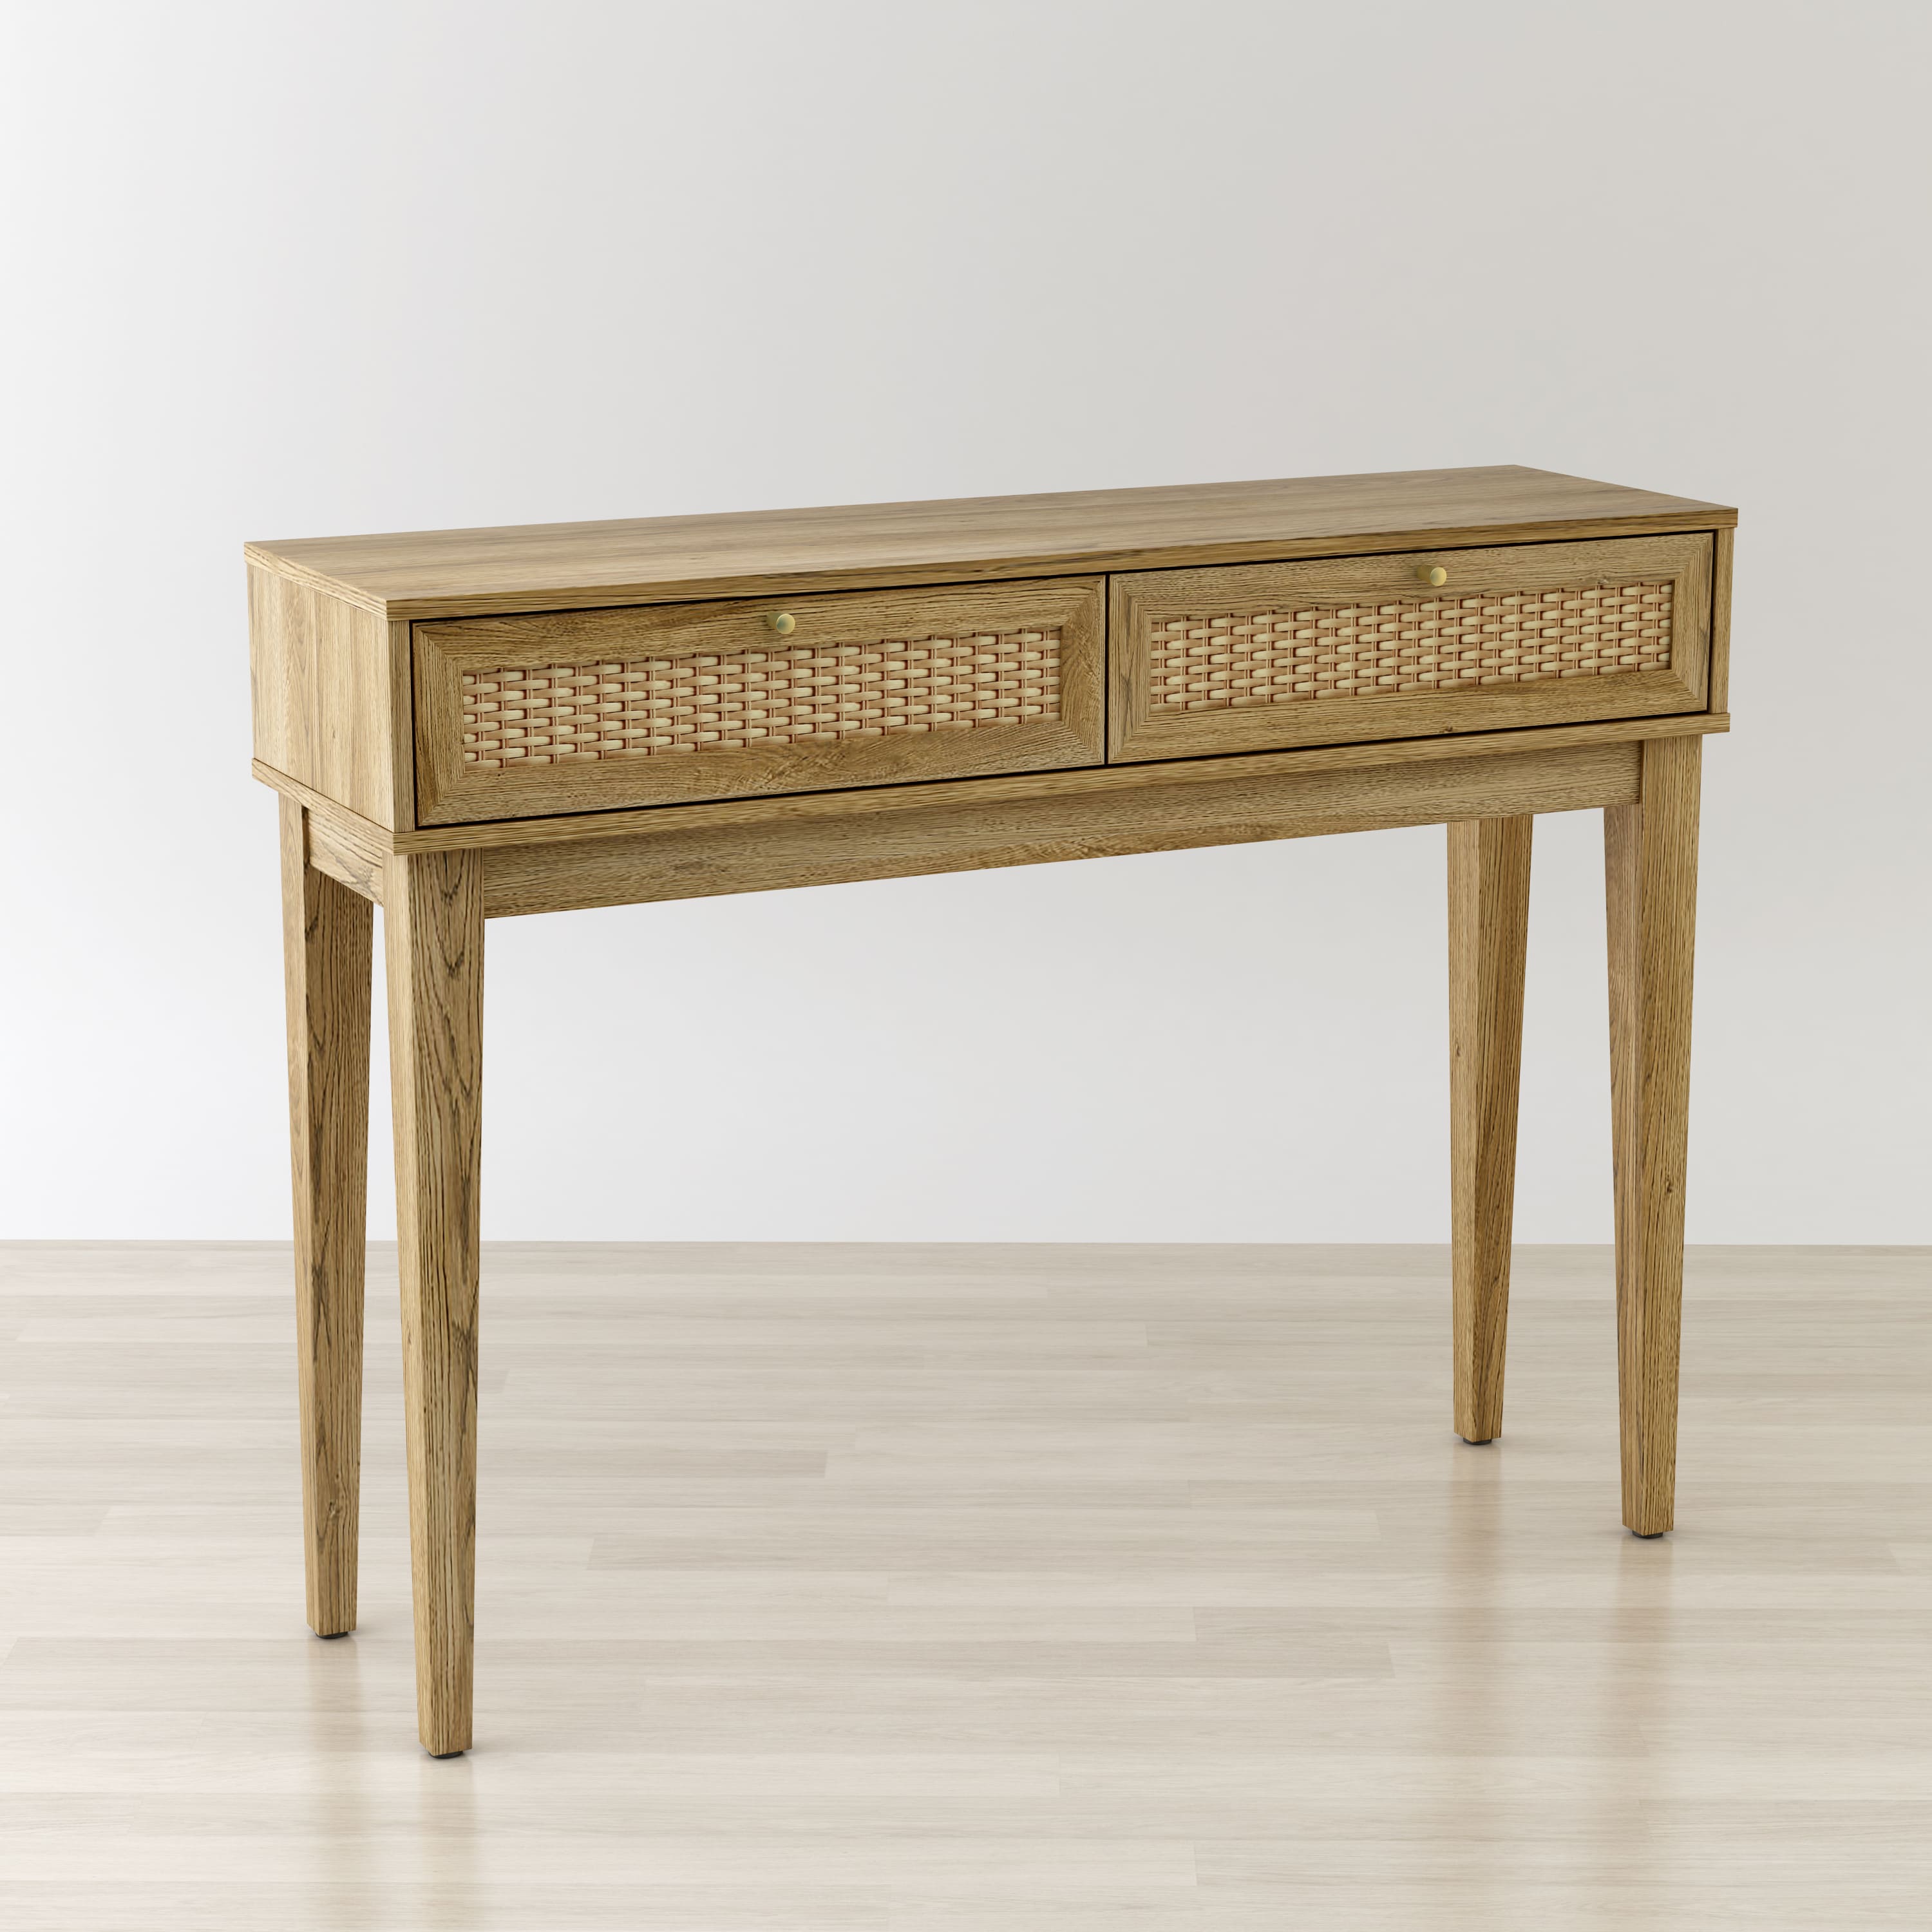 Anderson teak narrow console table